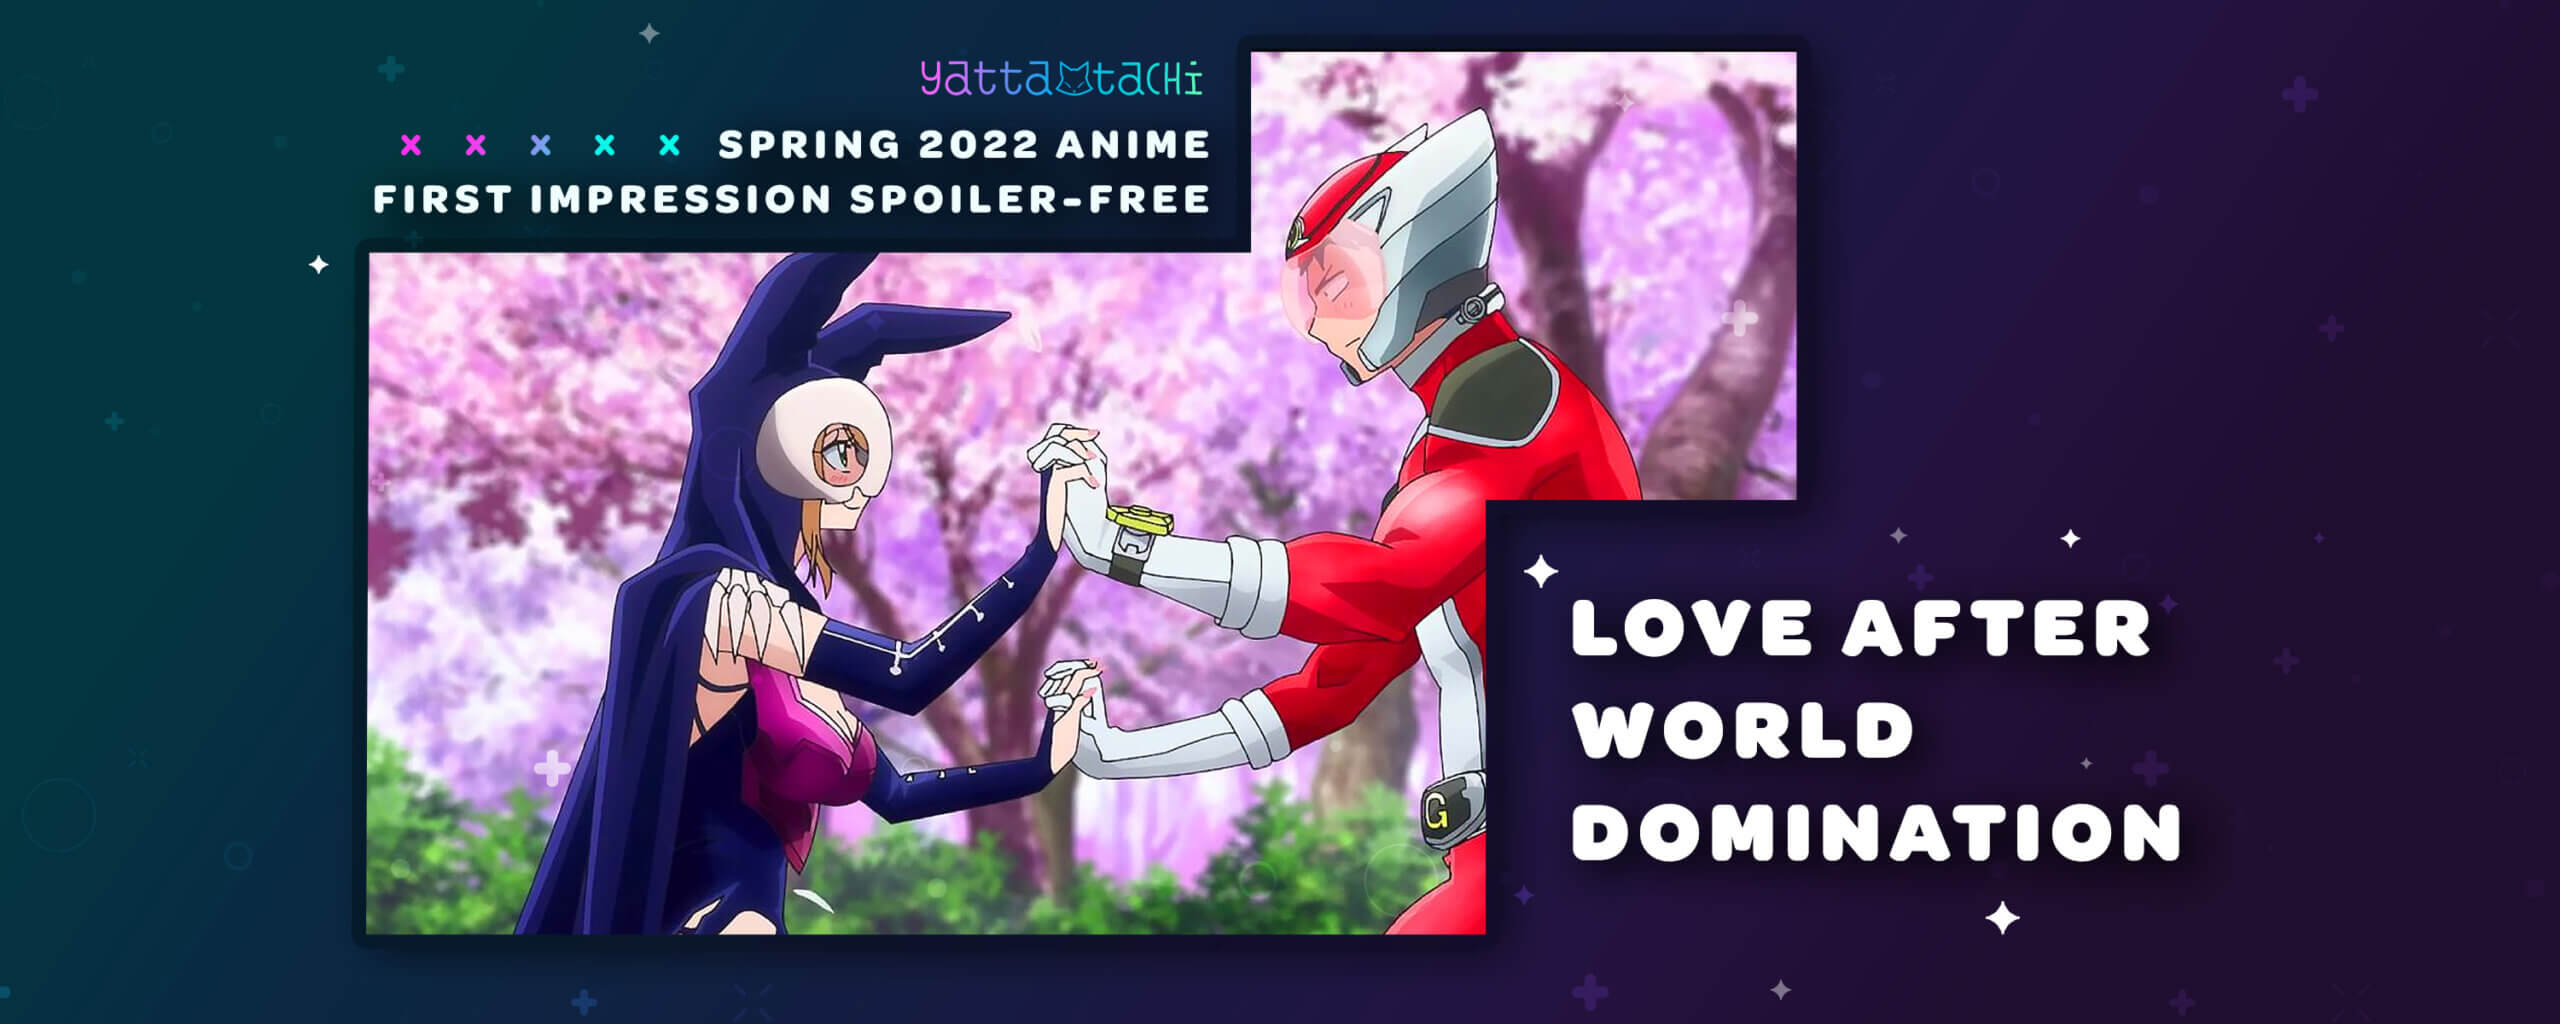 Love After World Domination vai ter anime